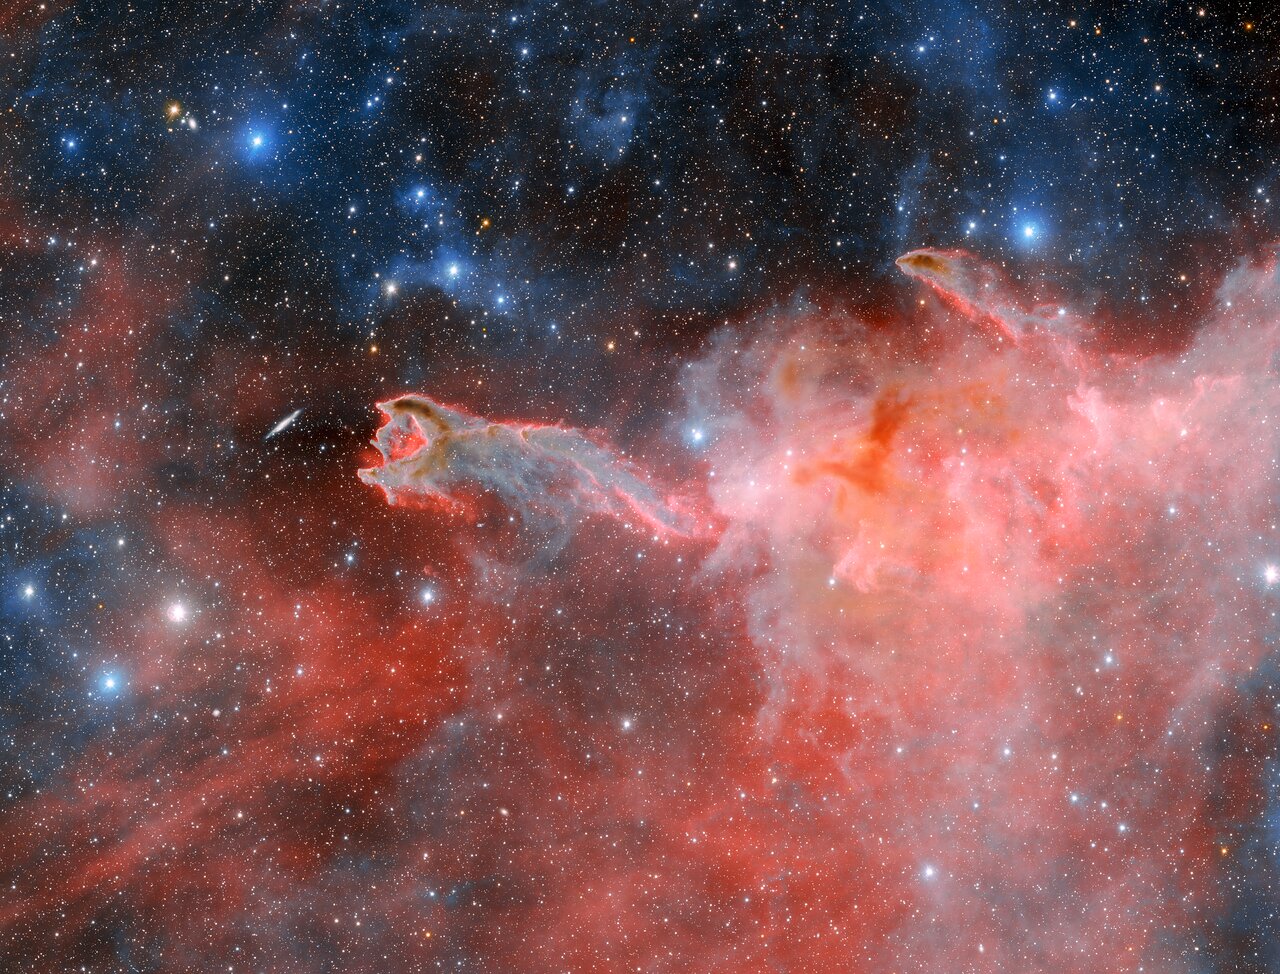 This cloudy, ominous structure is CG 4, a cometary globule nicknamed ‘God’s Hand’. CG 4 is one of many cometary globules present within the Milky Way, and how these objects get their distinct form is still a matter of debate among astronomers. This image was captured by the Department of Energy-fabricated Dark Energy Camera on the U.S. National Science Foundation Víctor M. Blanco 4-meter Telescope at Cerro Tololo Inter-American Observatory, a Program of NSF NOIRLab. In it, the features that classify CG 4 as a cometary globule are hard to miss. Its dusty head and long, faint tail vaguely resemble the appearance of a comet, though they have nothing in common. Astronomers theorize that cometary globules get their structure from the stellar winds of nearby hot, massive stars.